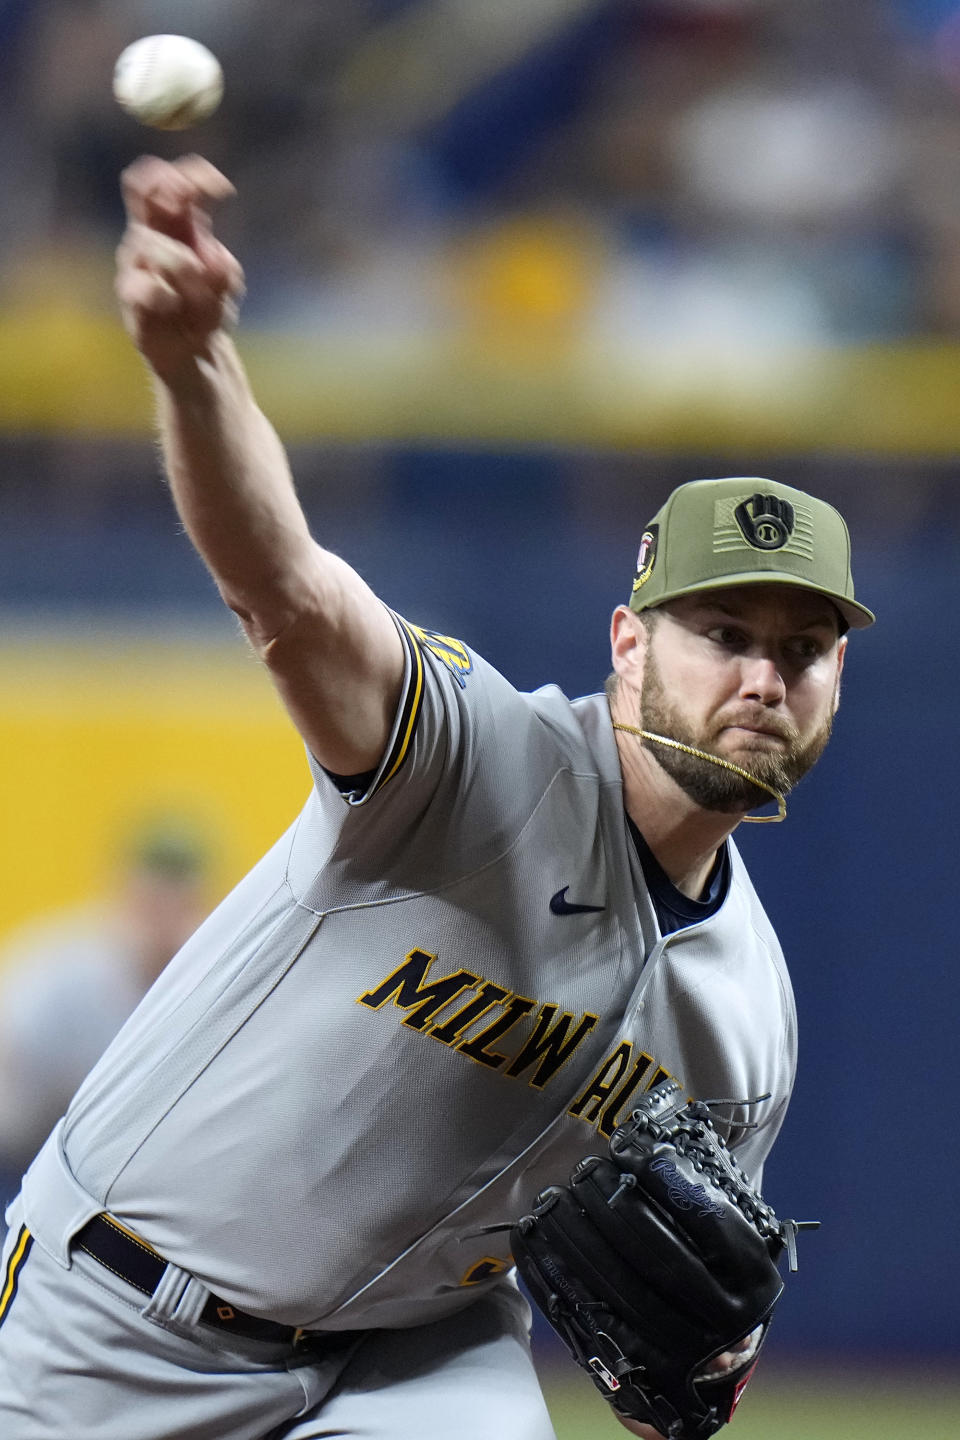 Milwaukee Brewers' Adrian Houser pitches to the Tampa Bay Rays during the first inning of a baseball game Friday, May 19, 2023, in St. Petersburg, Fla. (AP Photo/Chris O'Meara)